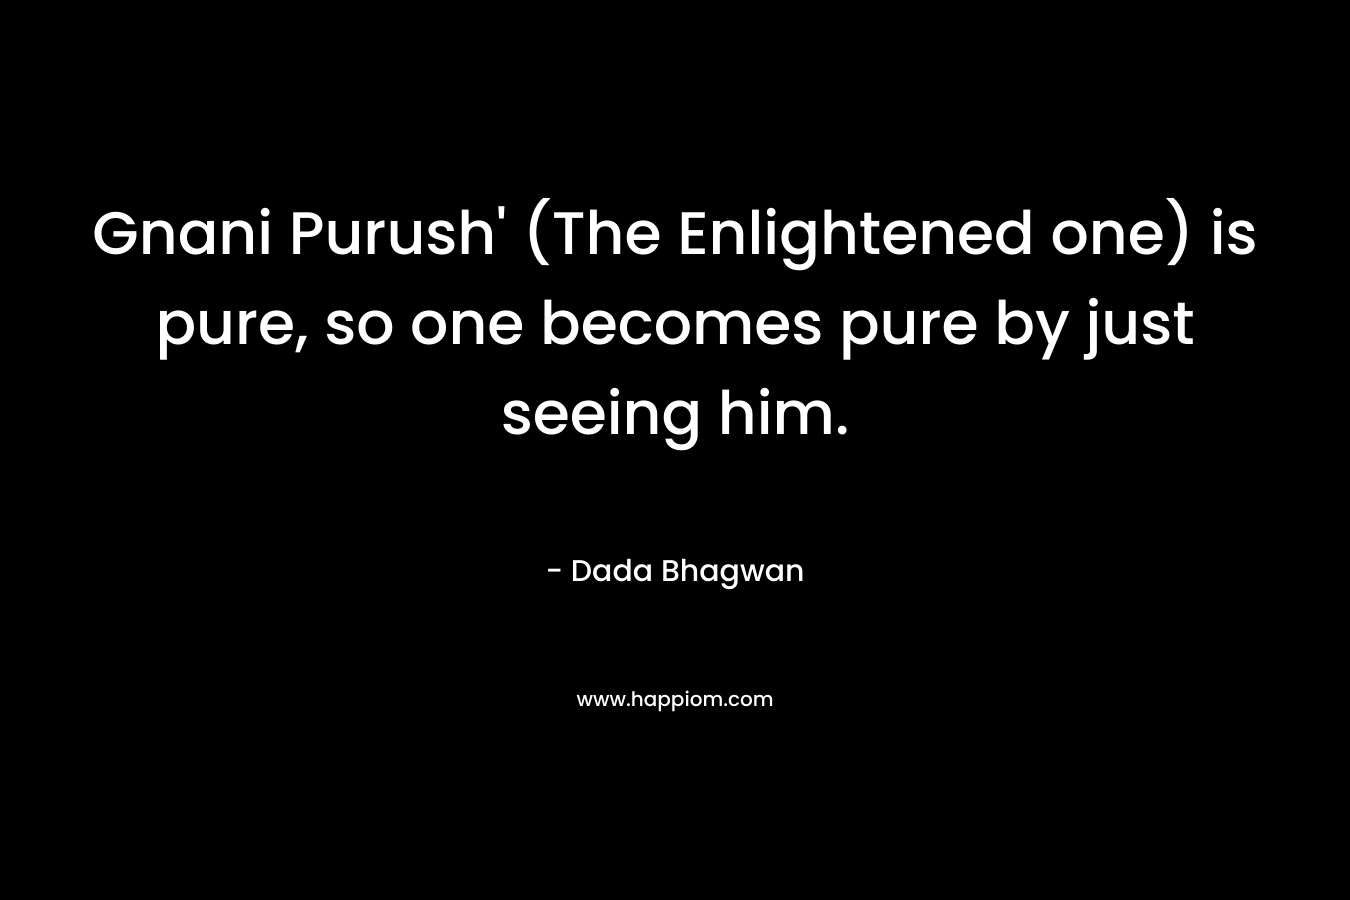 Gnani Purush' (The Enlightened one) is pure, so one becomes pure by just seeing him.